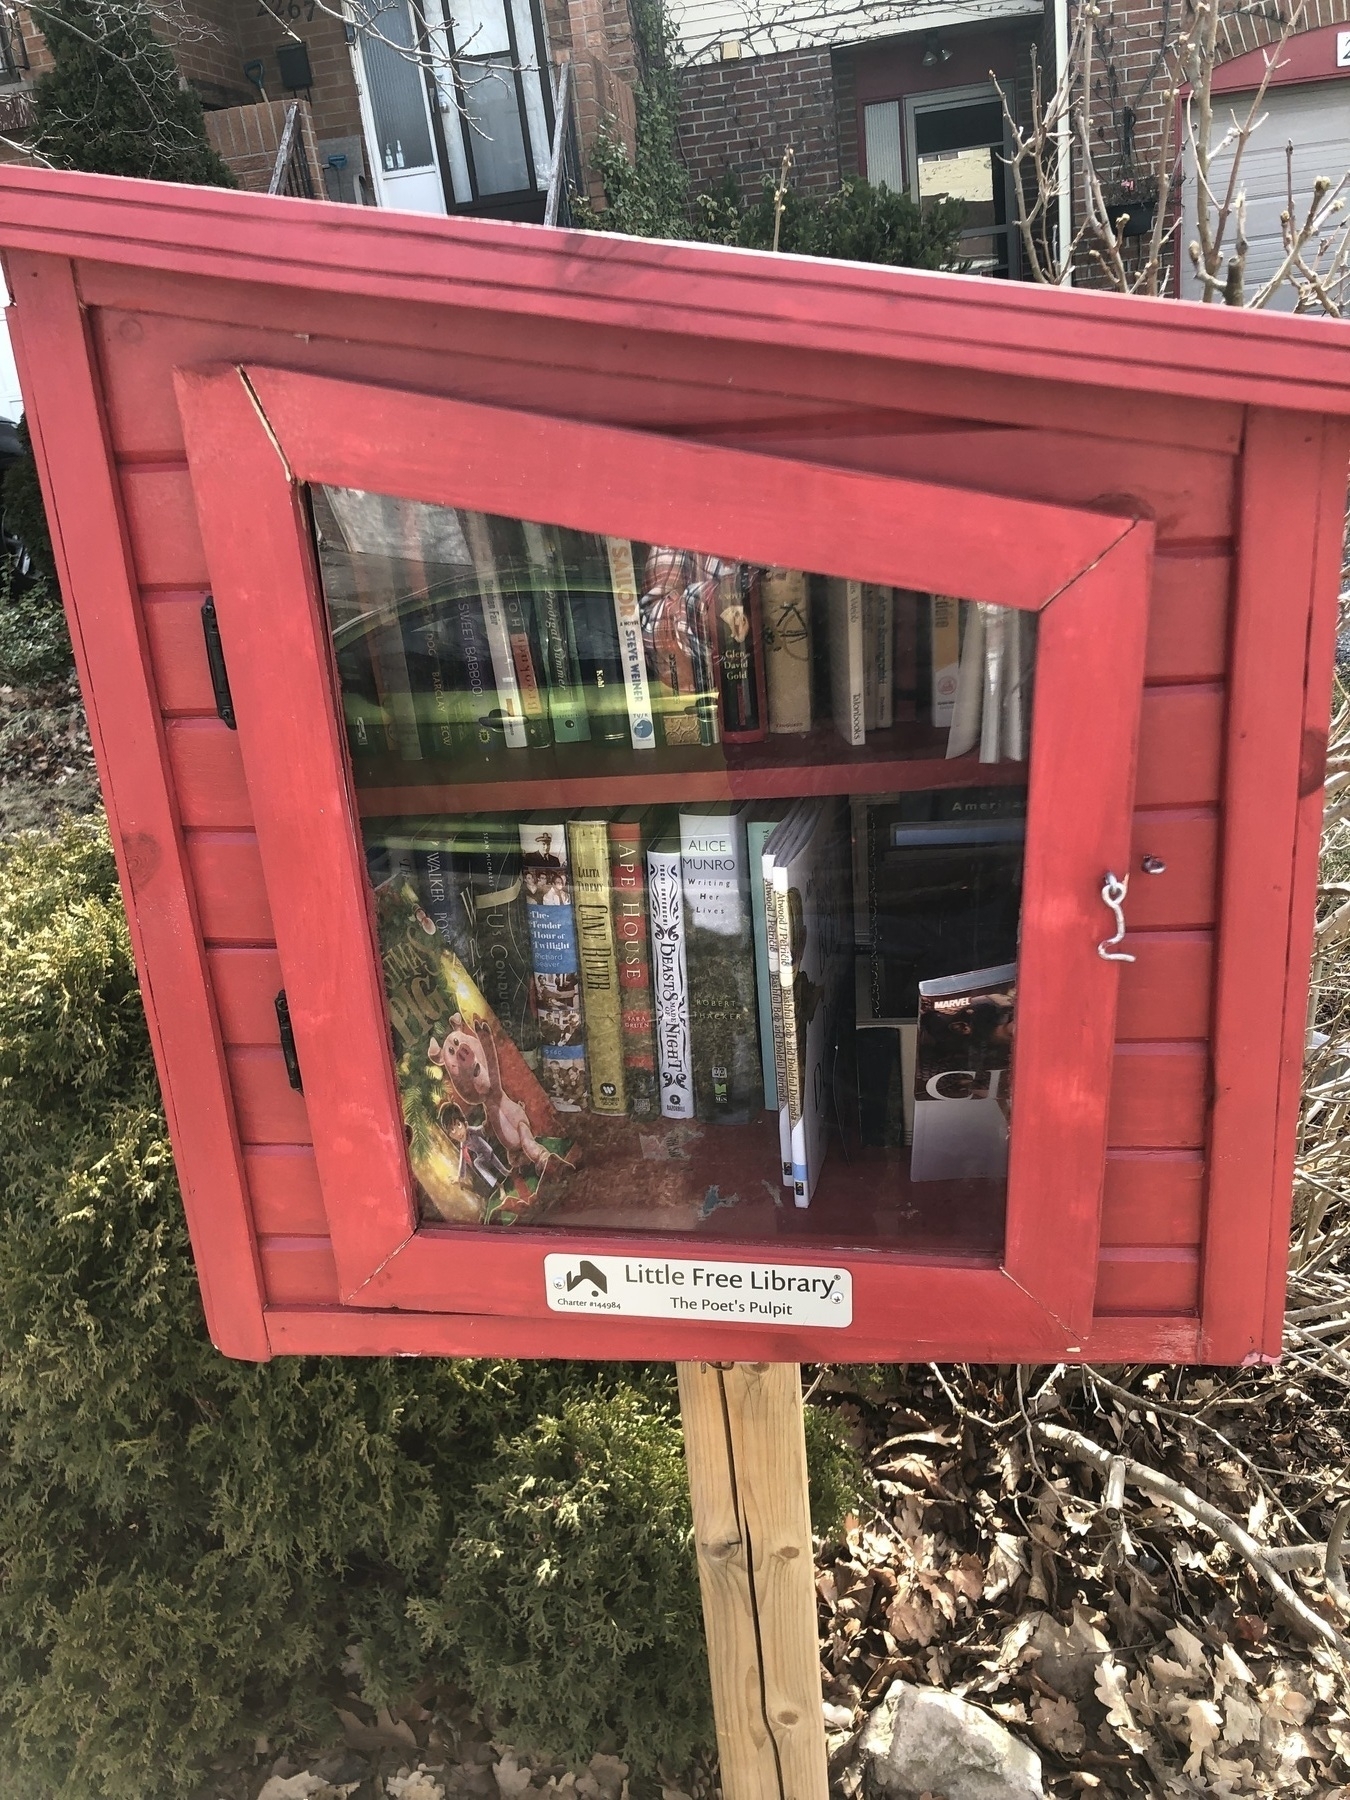 A red box on a wooden pole filled with books as part of a free library.  